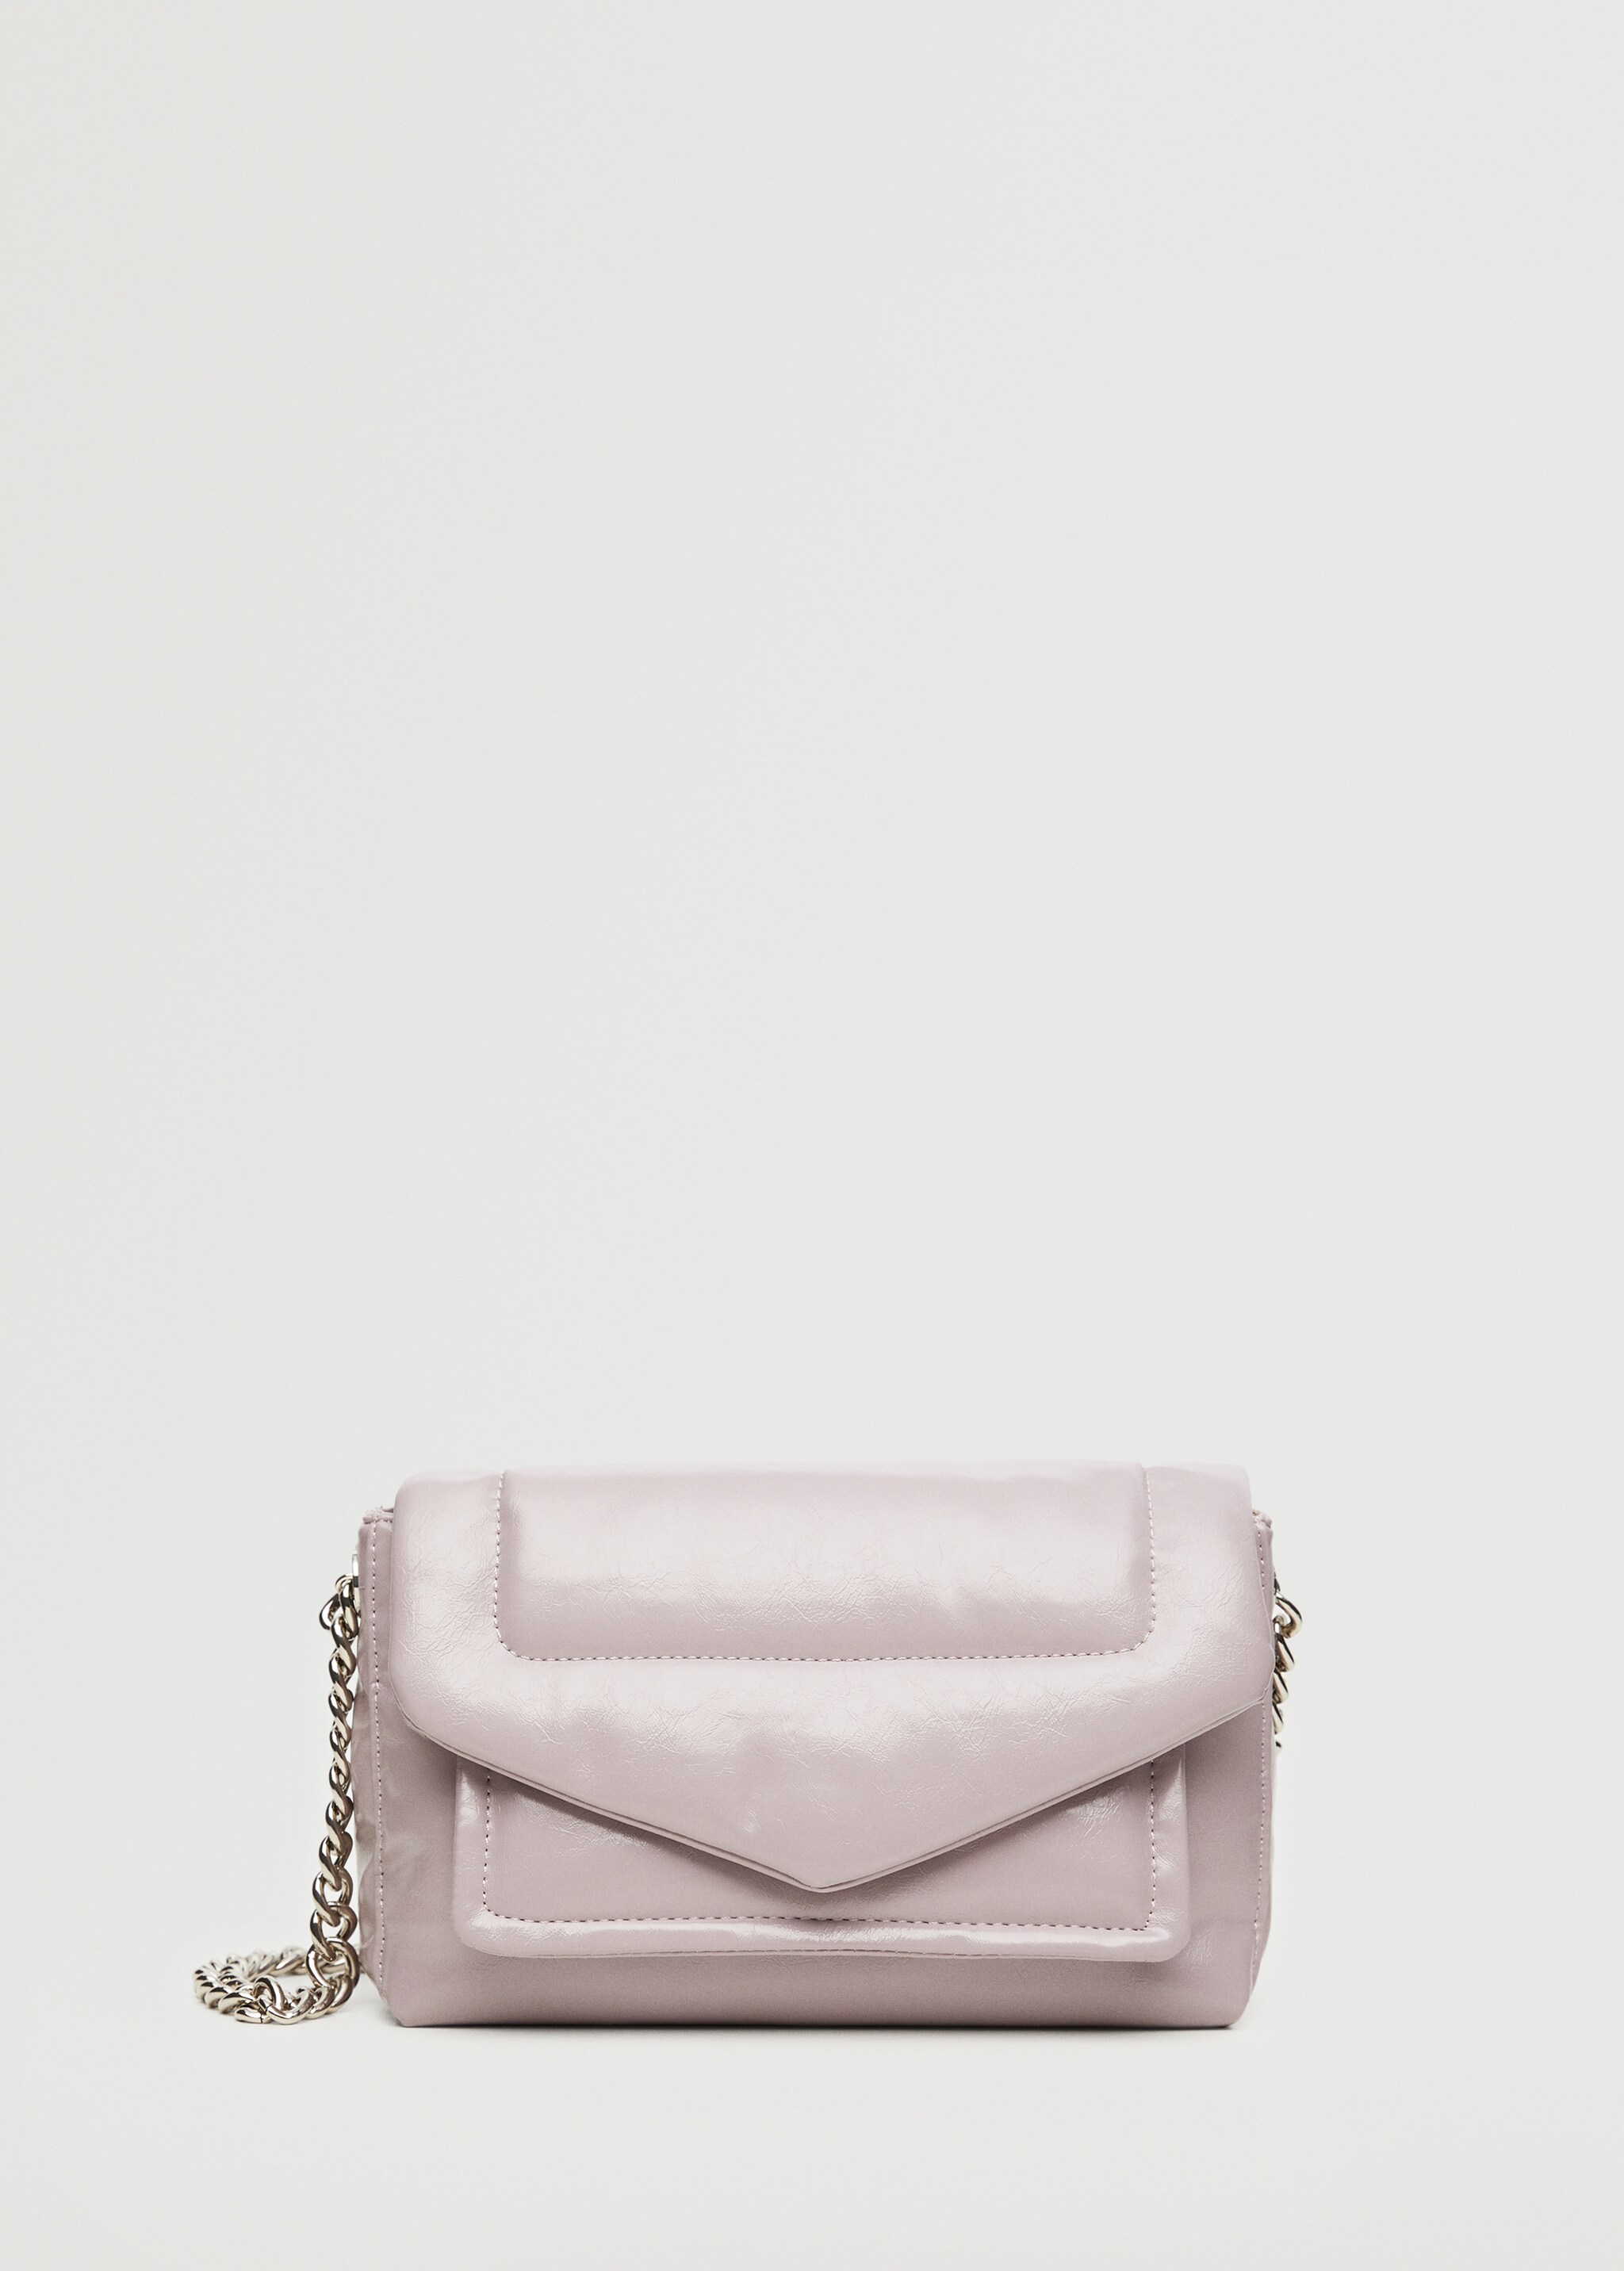 Flap chain bag - Article without model